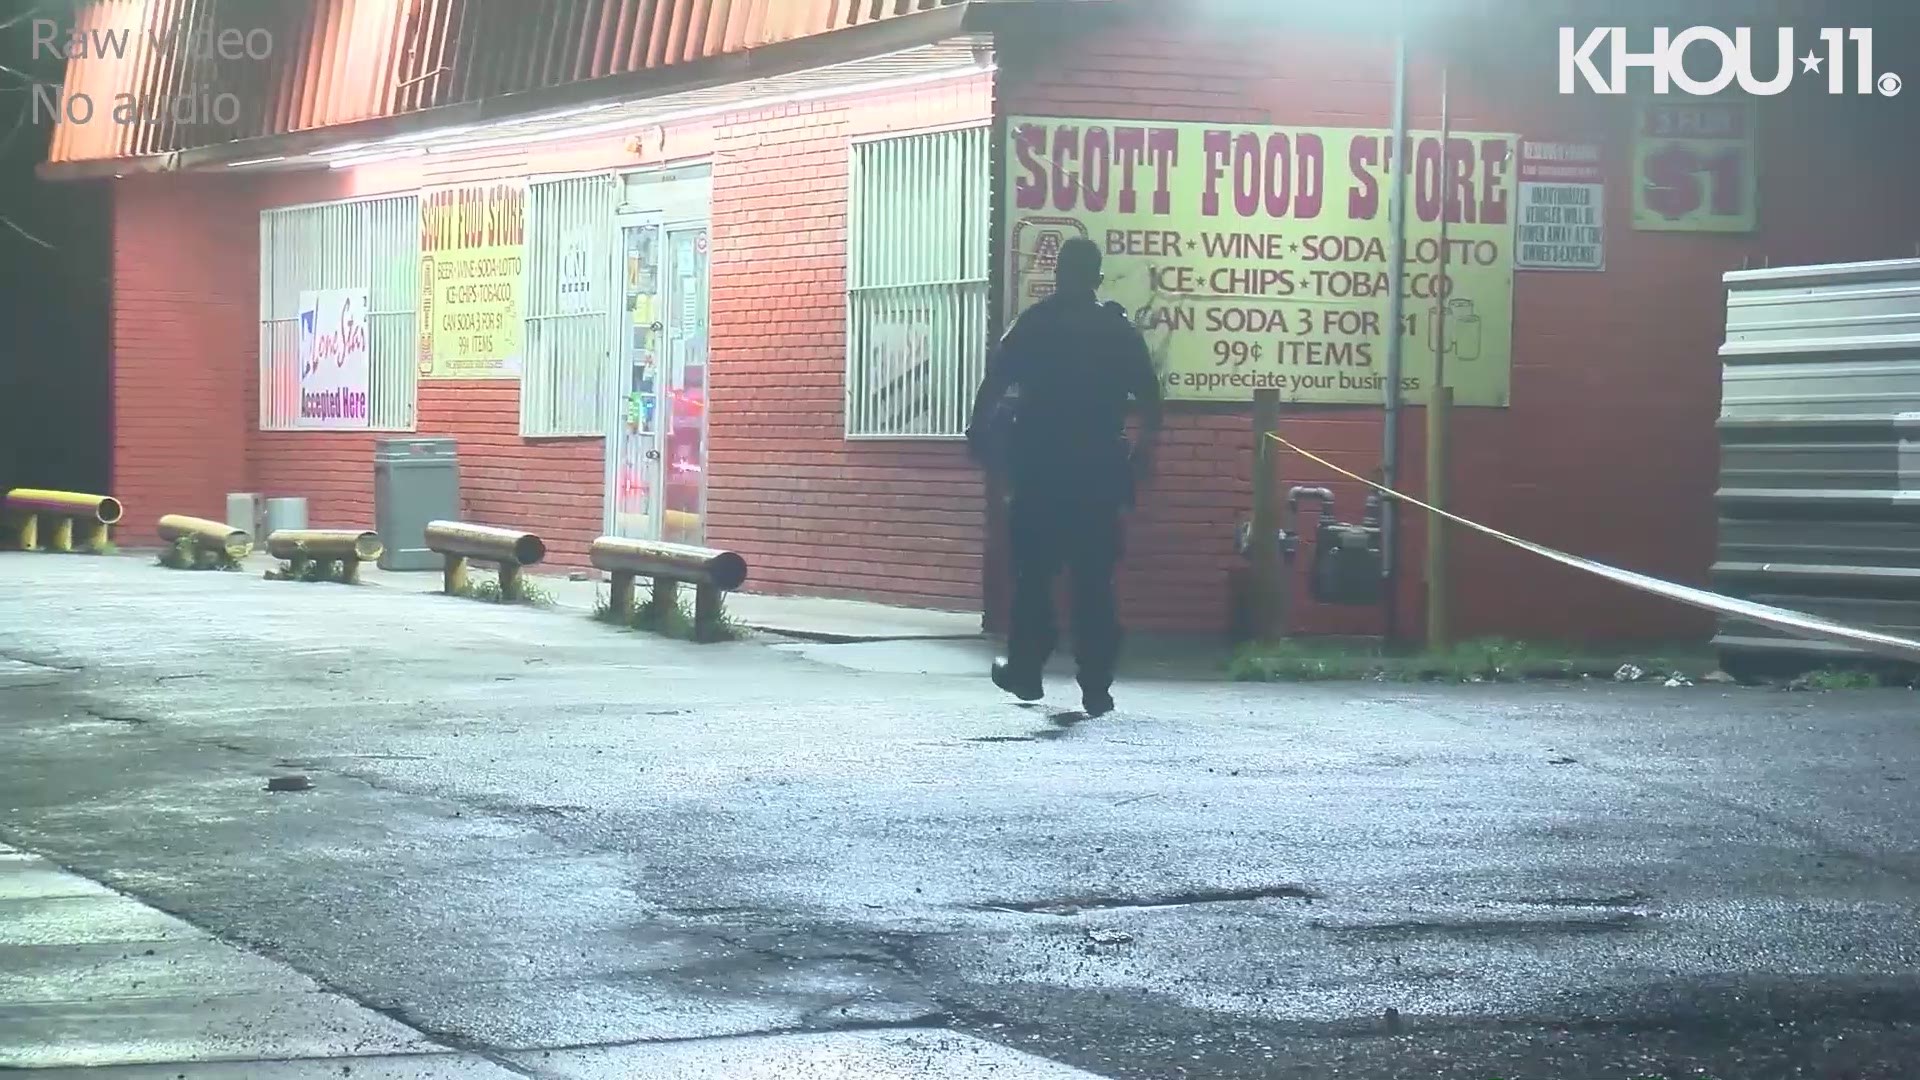 A man was gunned down after he left a food store on Scott Street on Feb. 9, 2020.